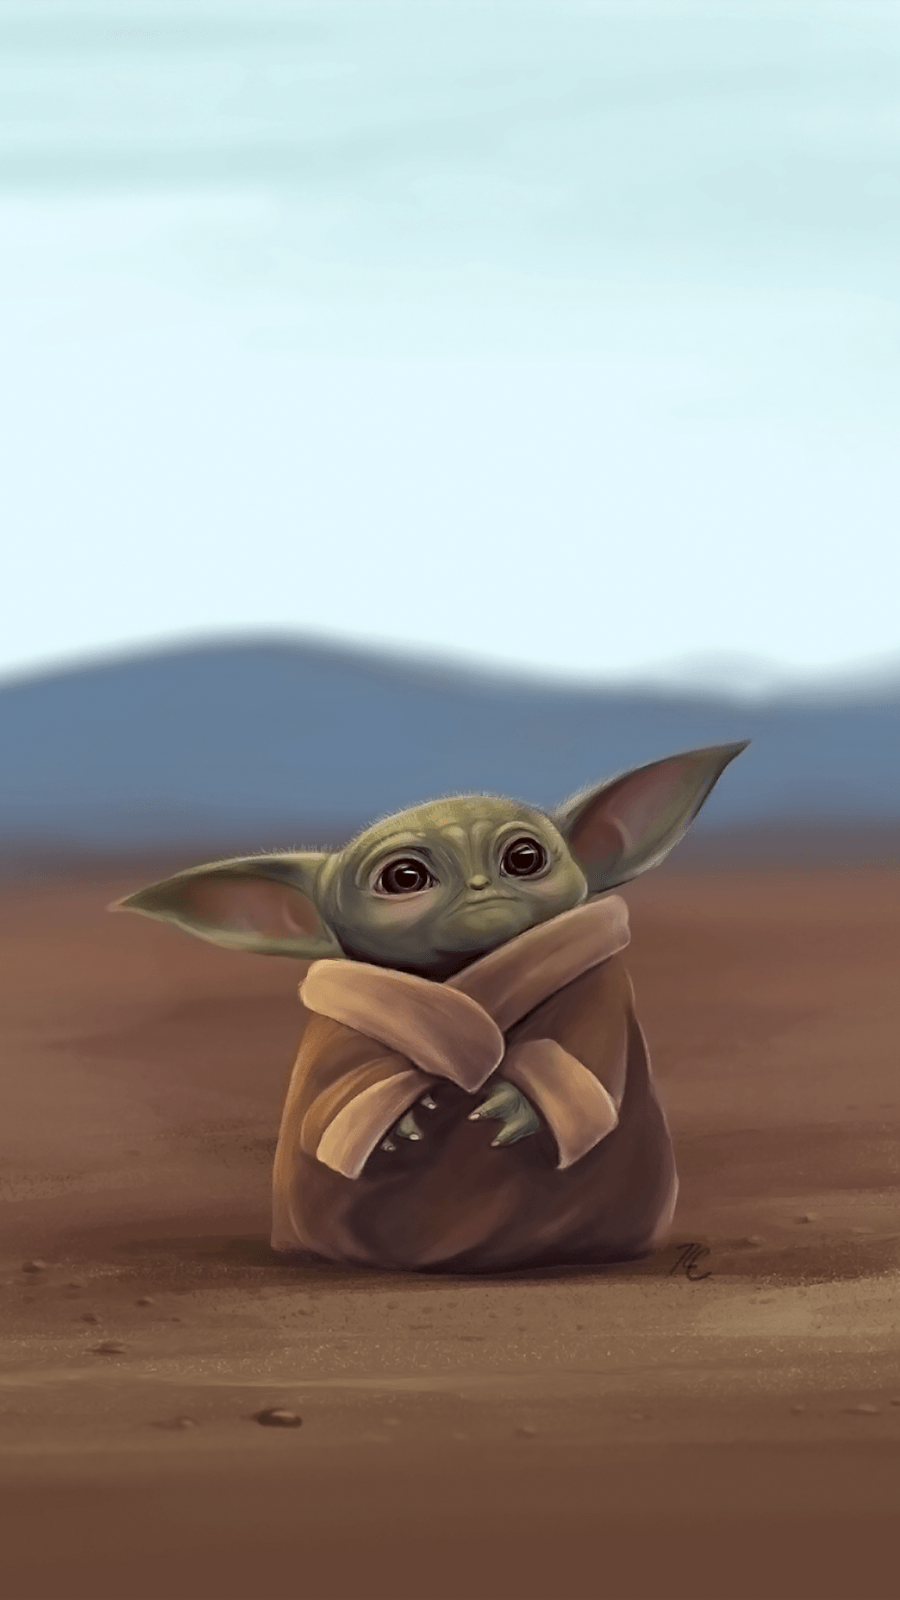 The child Baby Yoda phone wallpaper collection. Cool Wallpaper